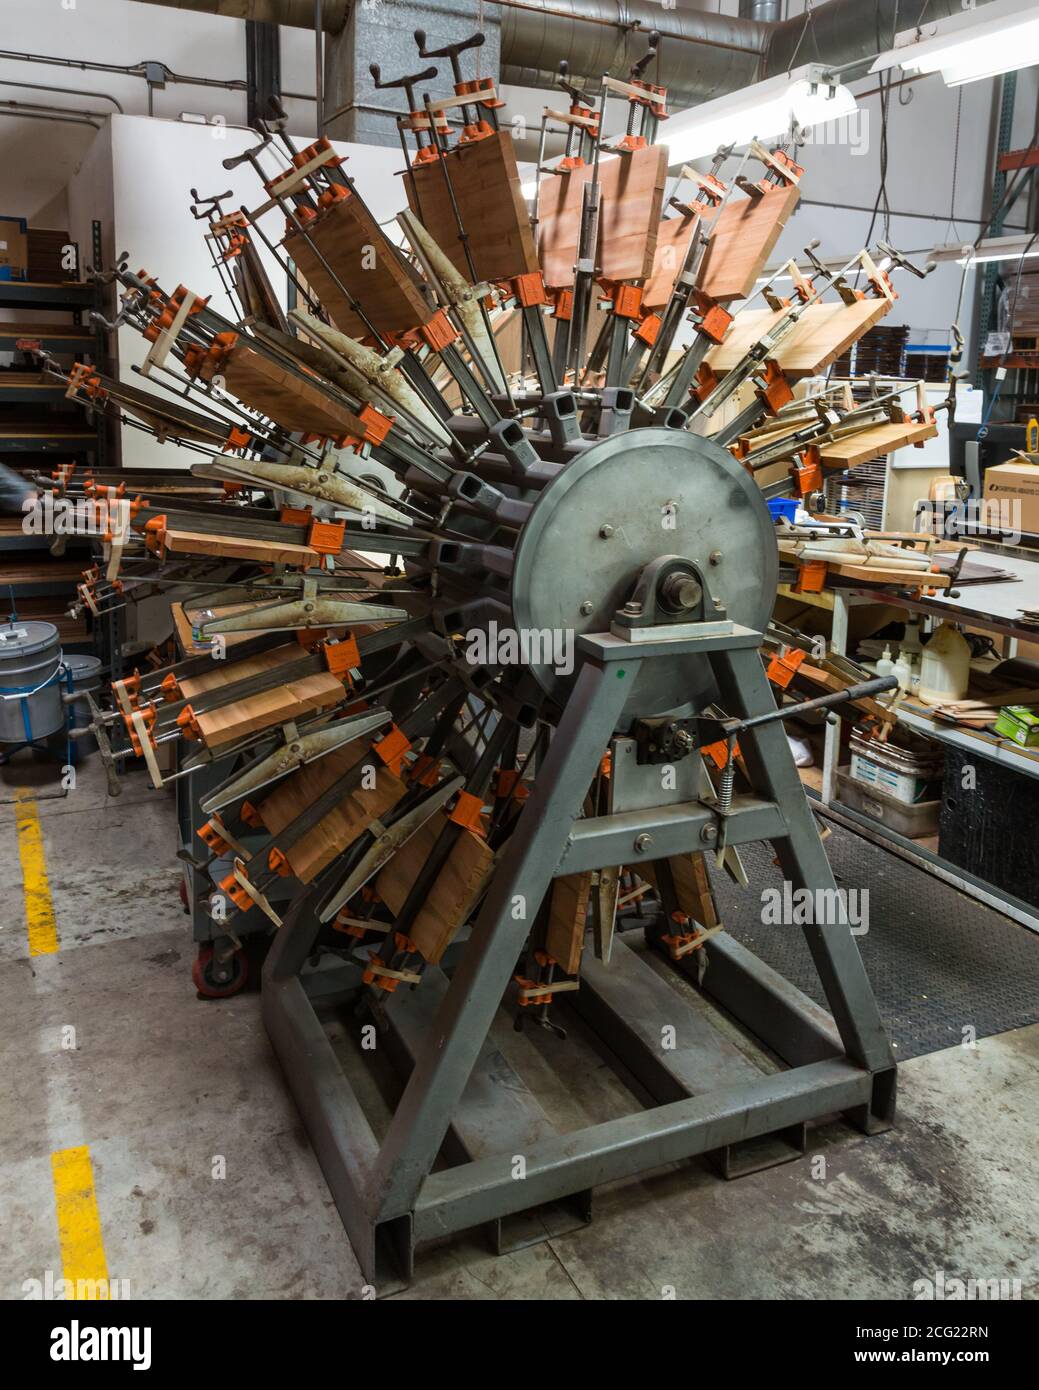 A special rotating clamping machine for holding glued wood parts in the Taylor Guitar factory in El Cajon, California. Stock Photo